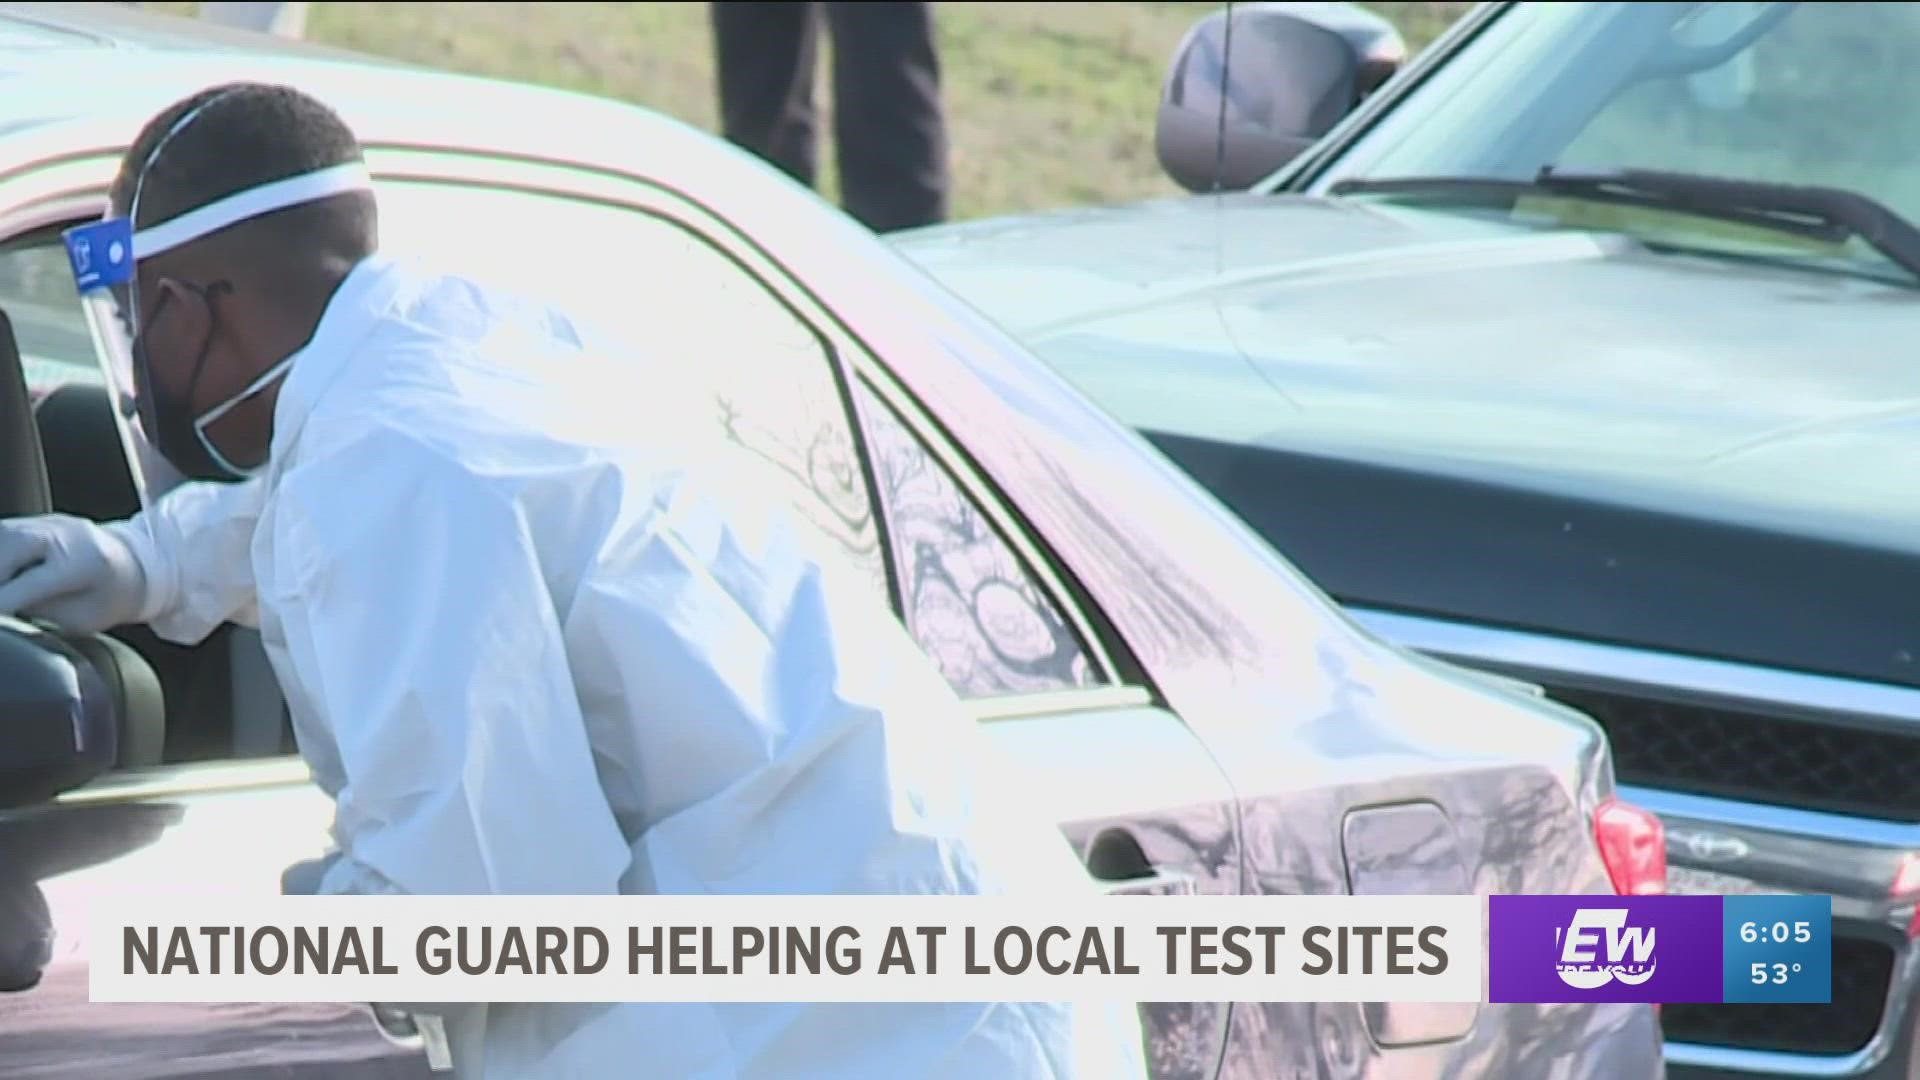 Across the northwest Arkansas area, the National Guard has been deployed to help administer tests and monitor traffic at testing sites as patient lines increase.